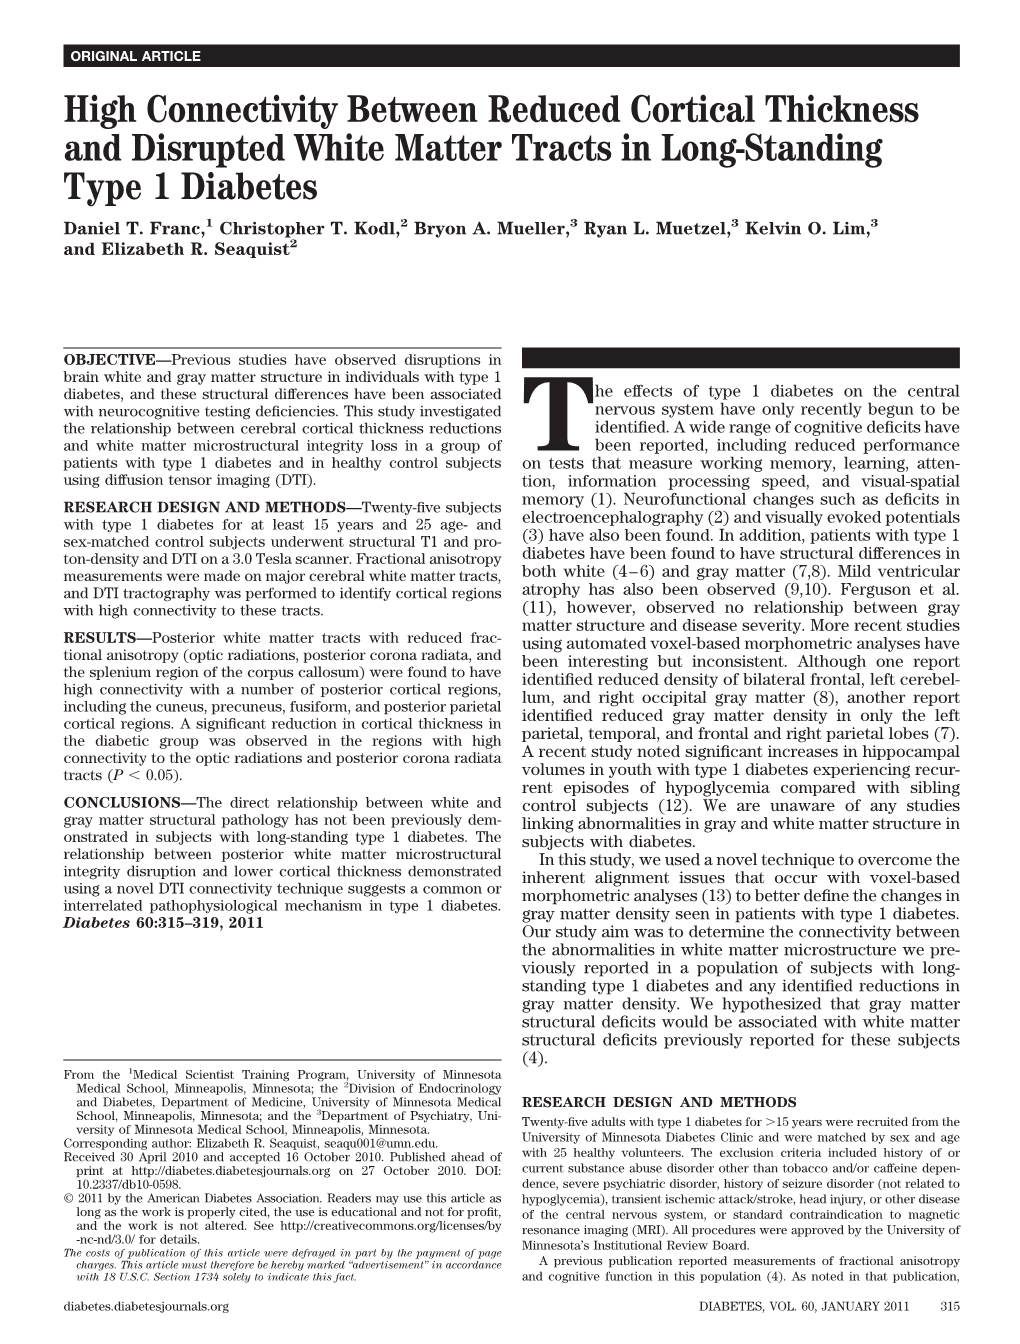 High Connectivity Between Reduced Cortical Thickness and Disrupted White Matter Tracts in Long-Standing Type 1 Diabetes Daniel T